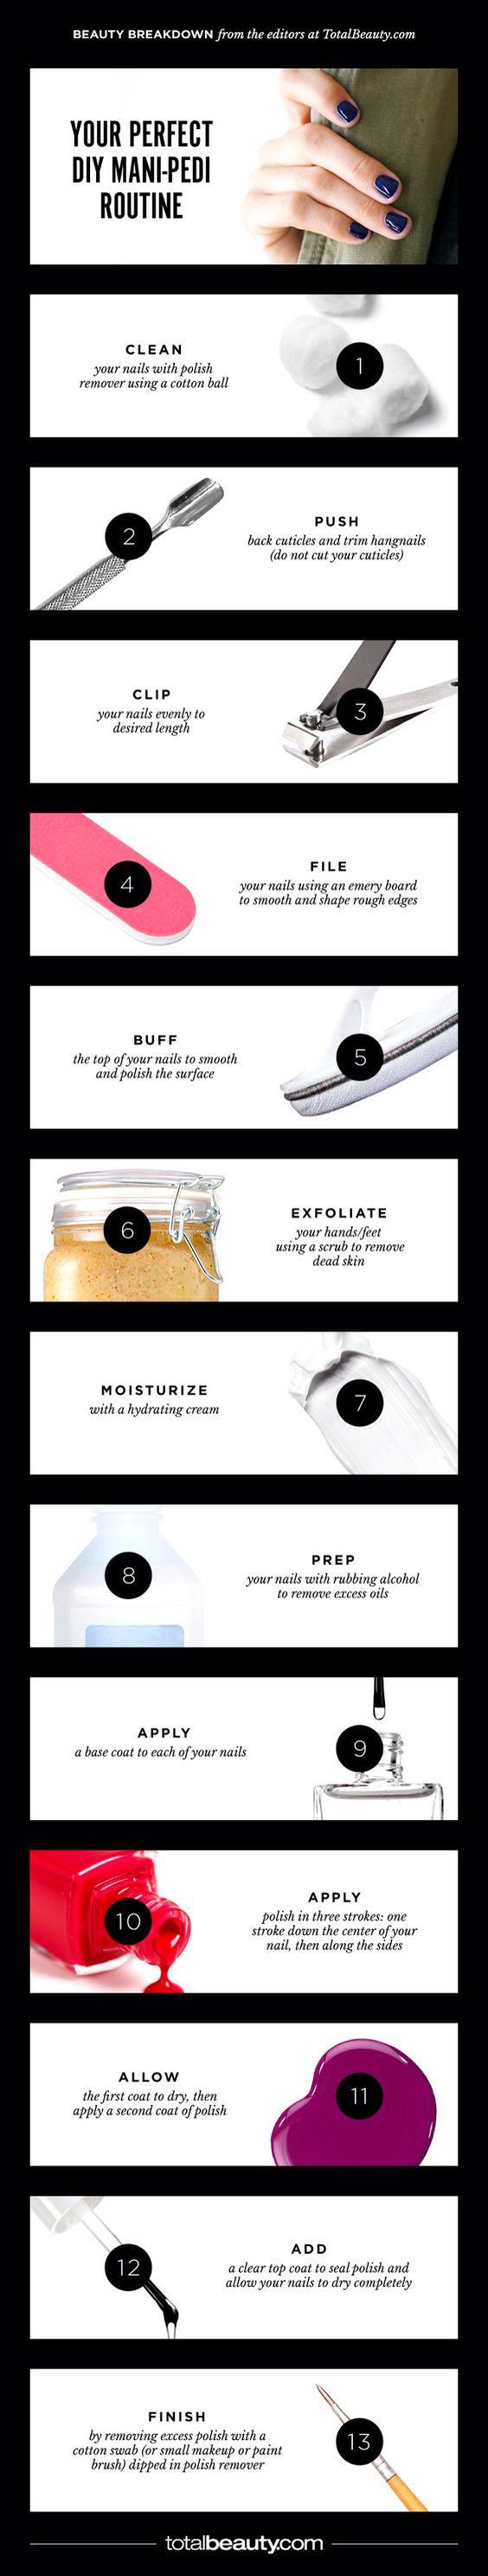 7 Ways to Pamper Yourself